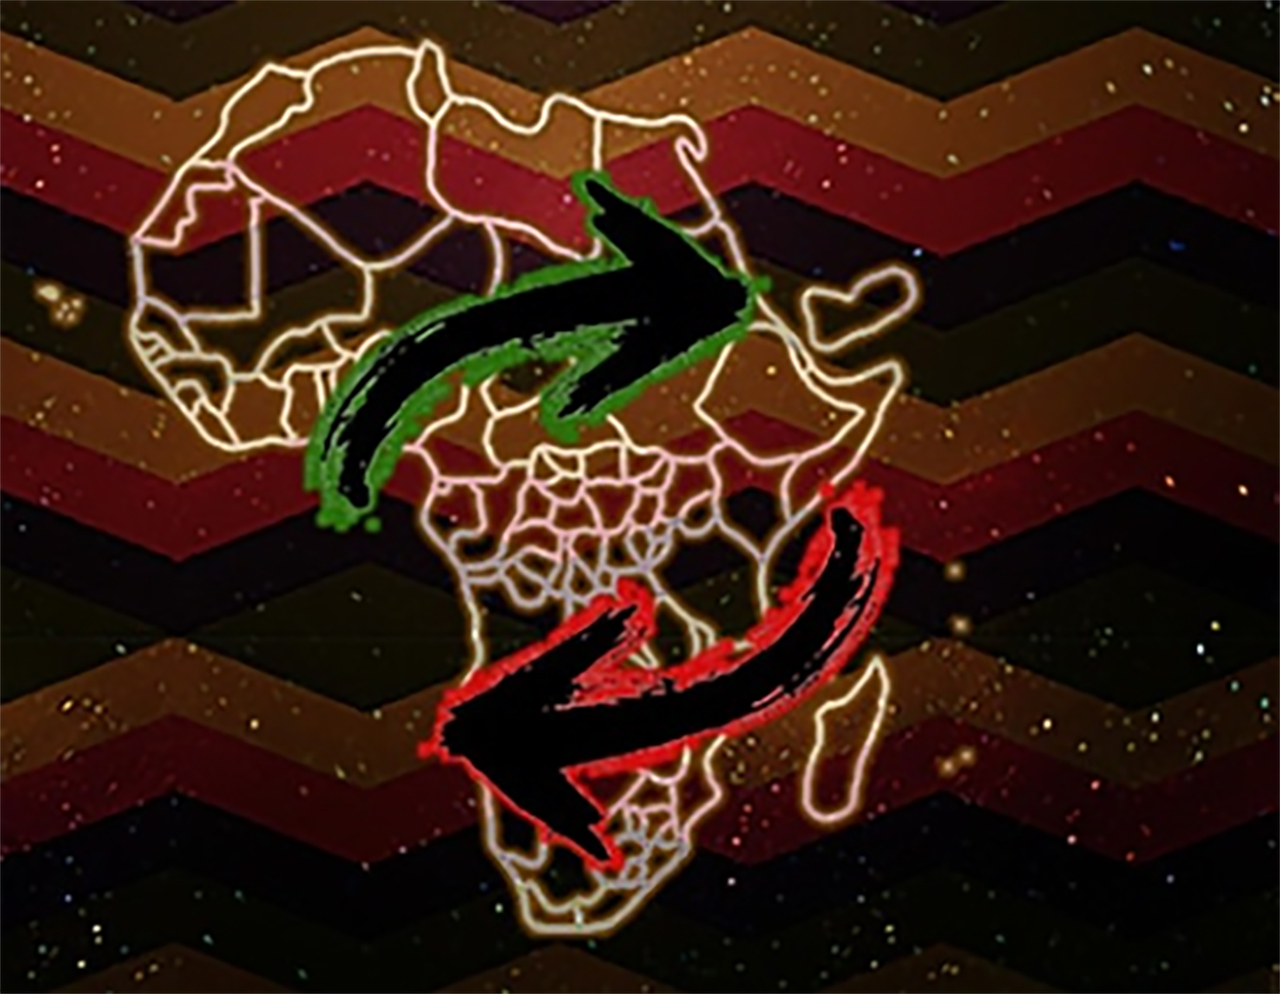 Image of Africa with arrows to represent people's movement